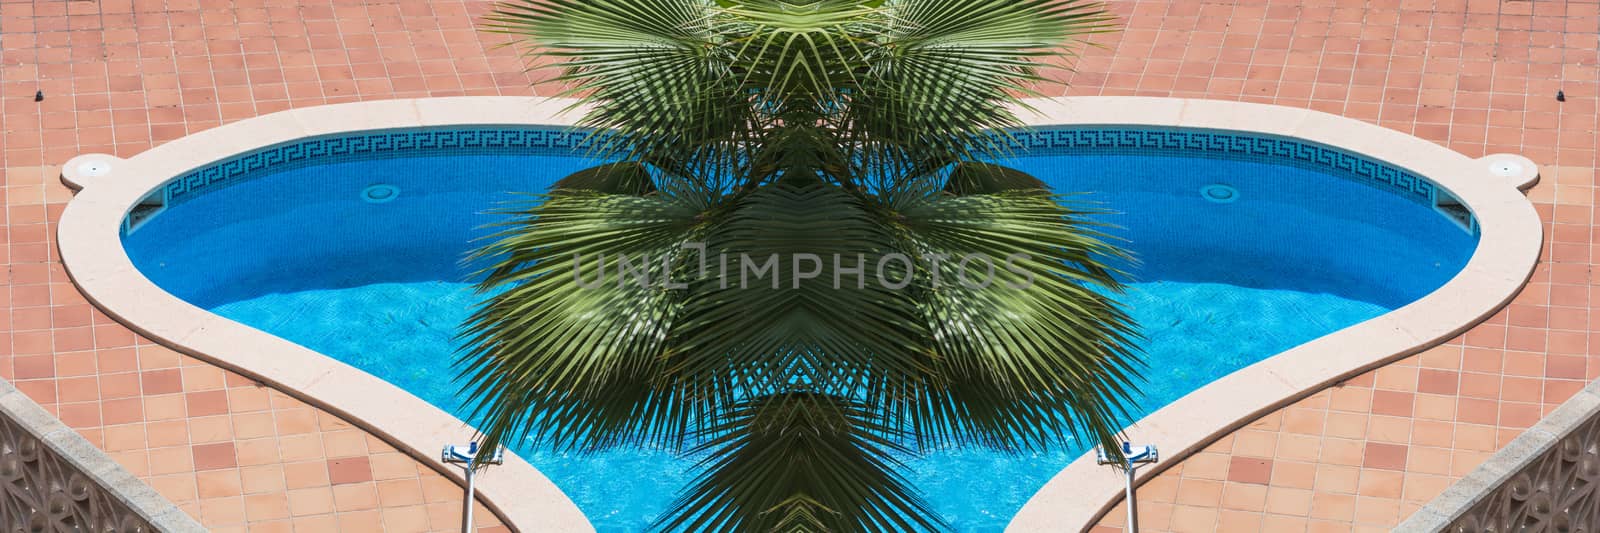 Swimming pool with blue tiles by JFsPic